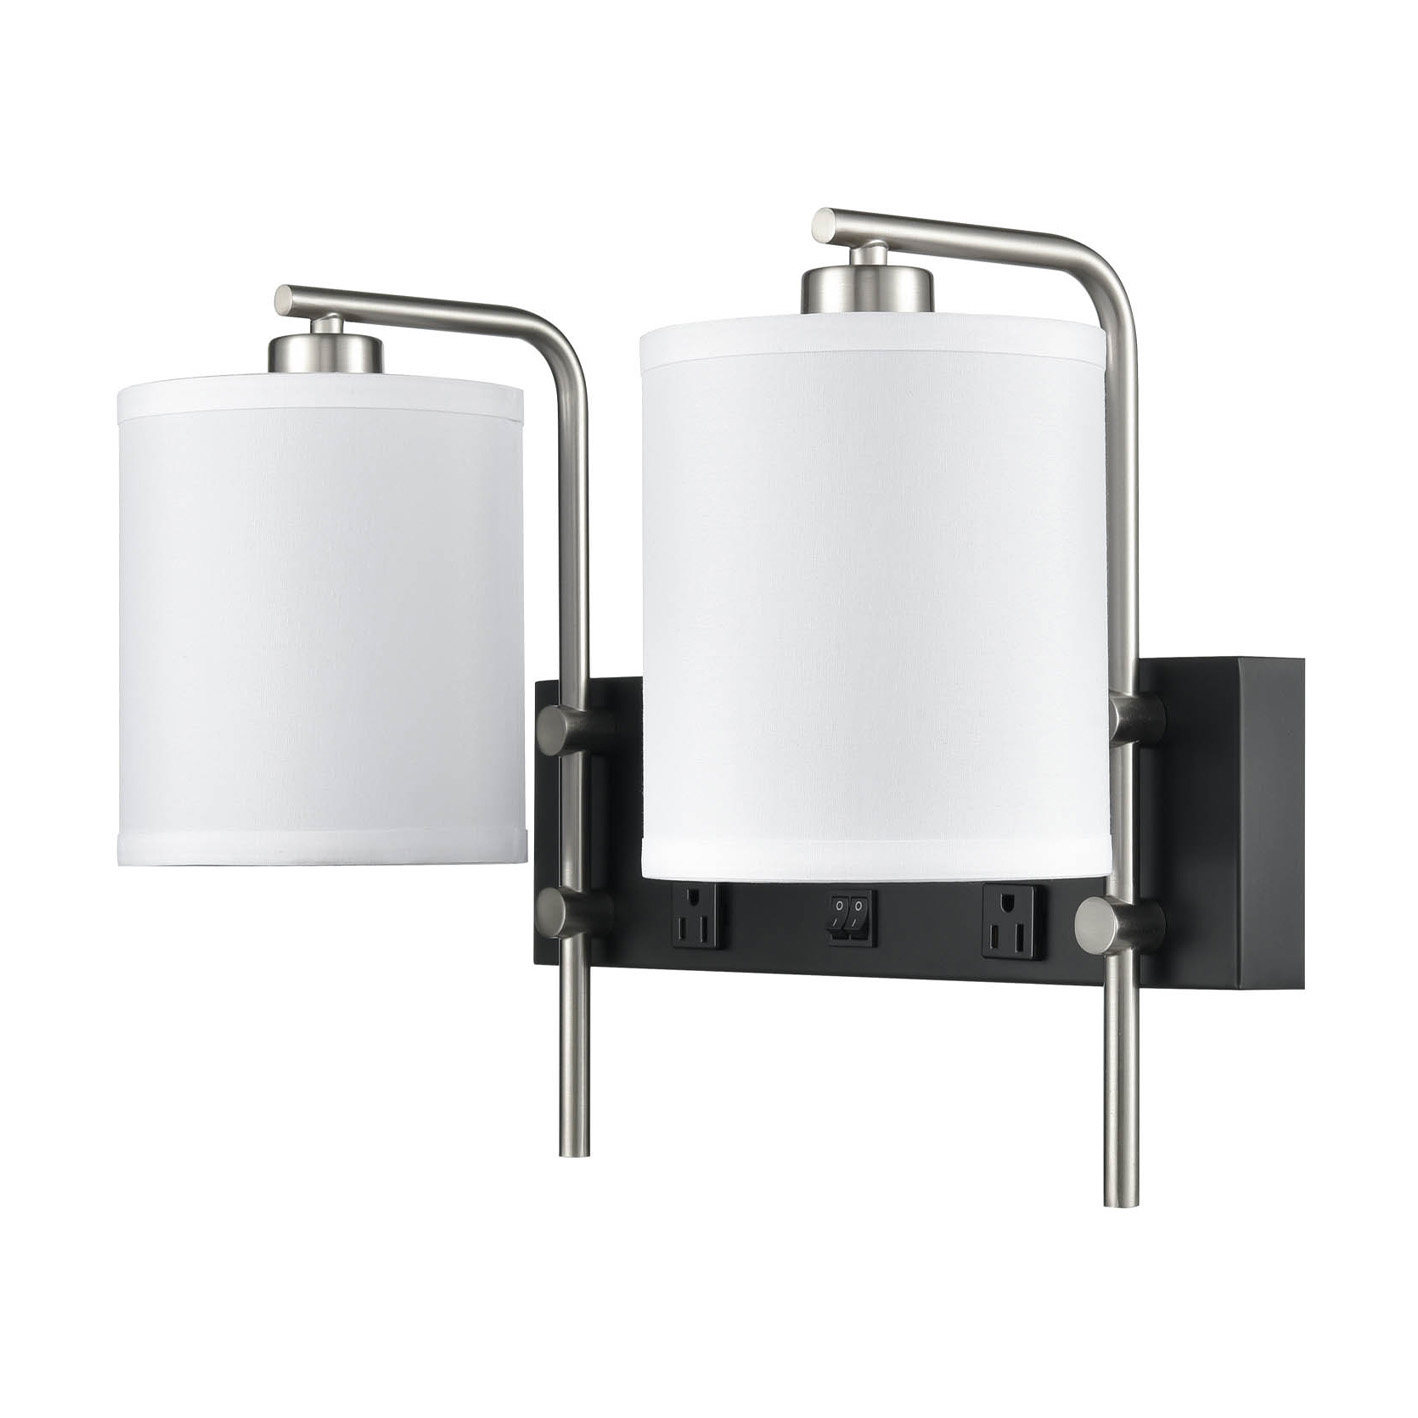 Wall Lamp Brushed Nickel Powder Coated Matte Black With two Switch